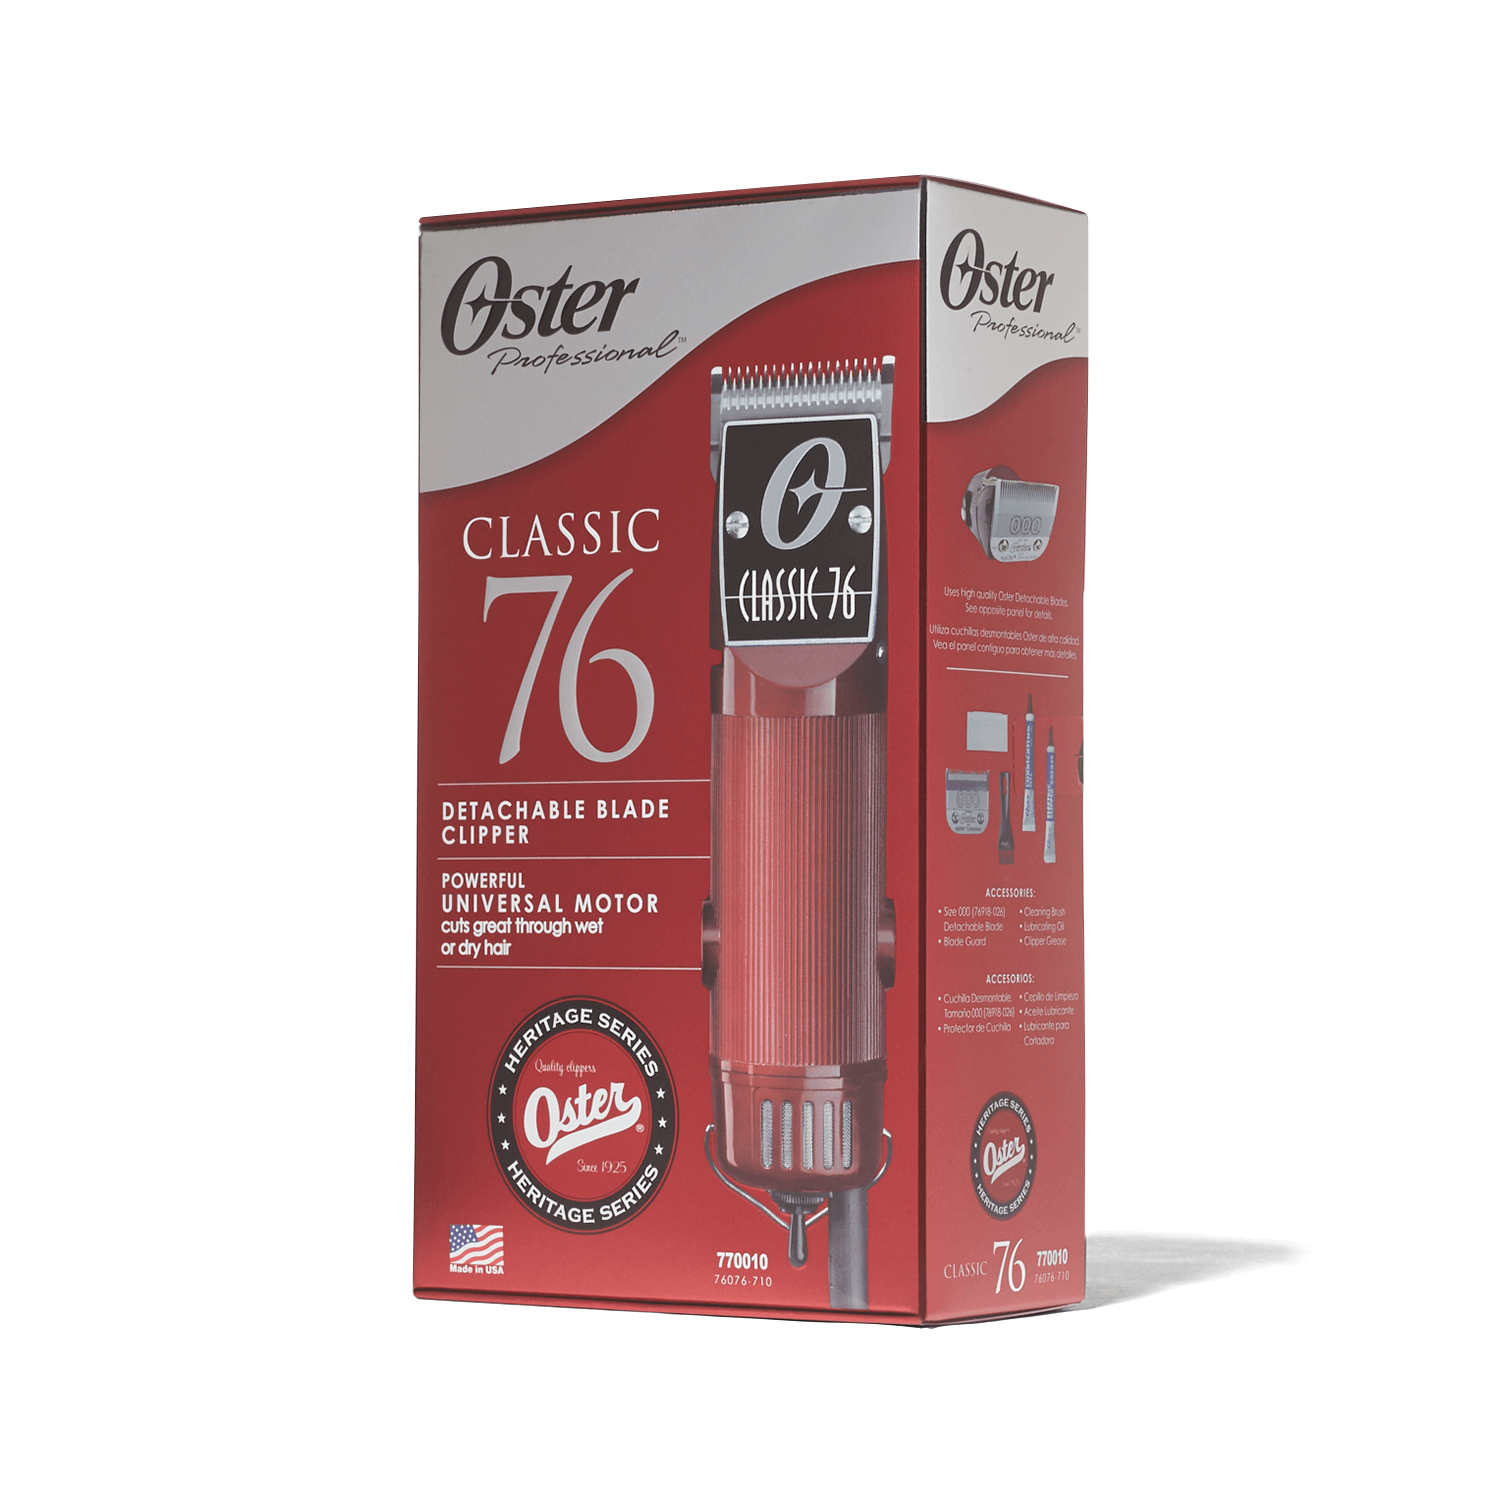 oster 76 clippers canada